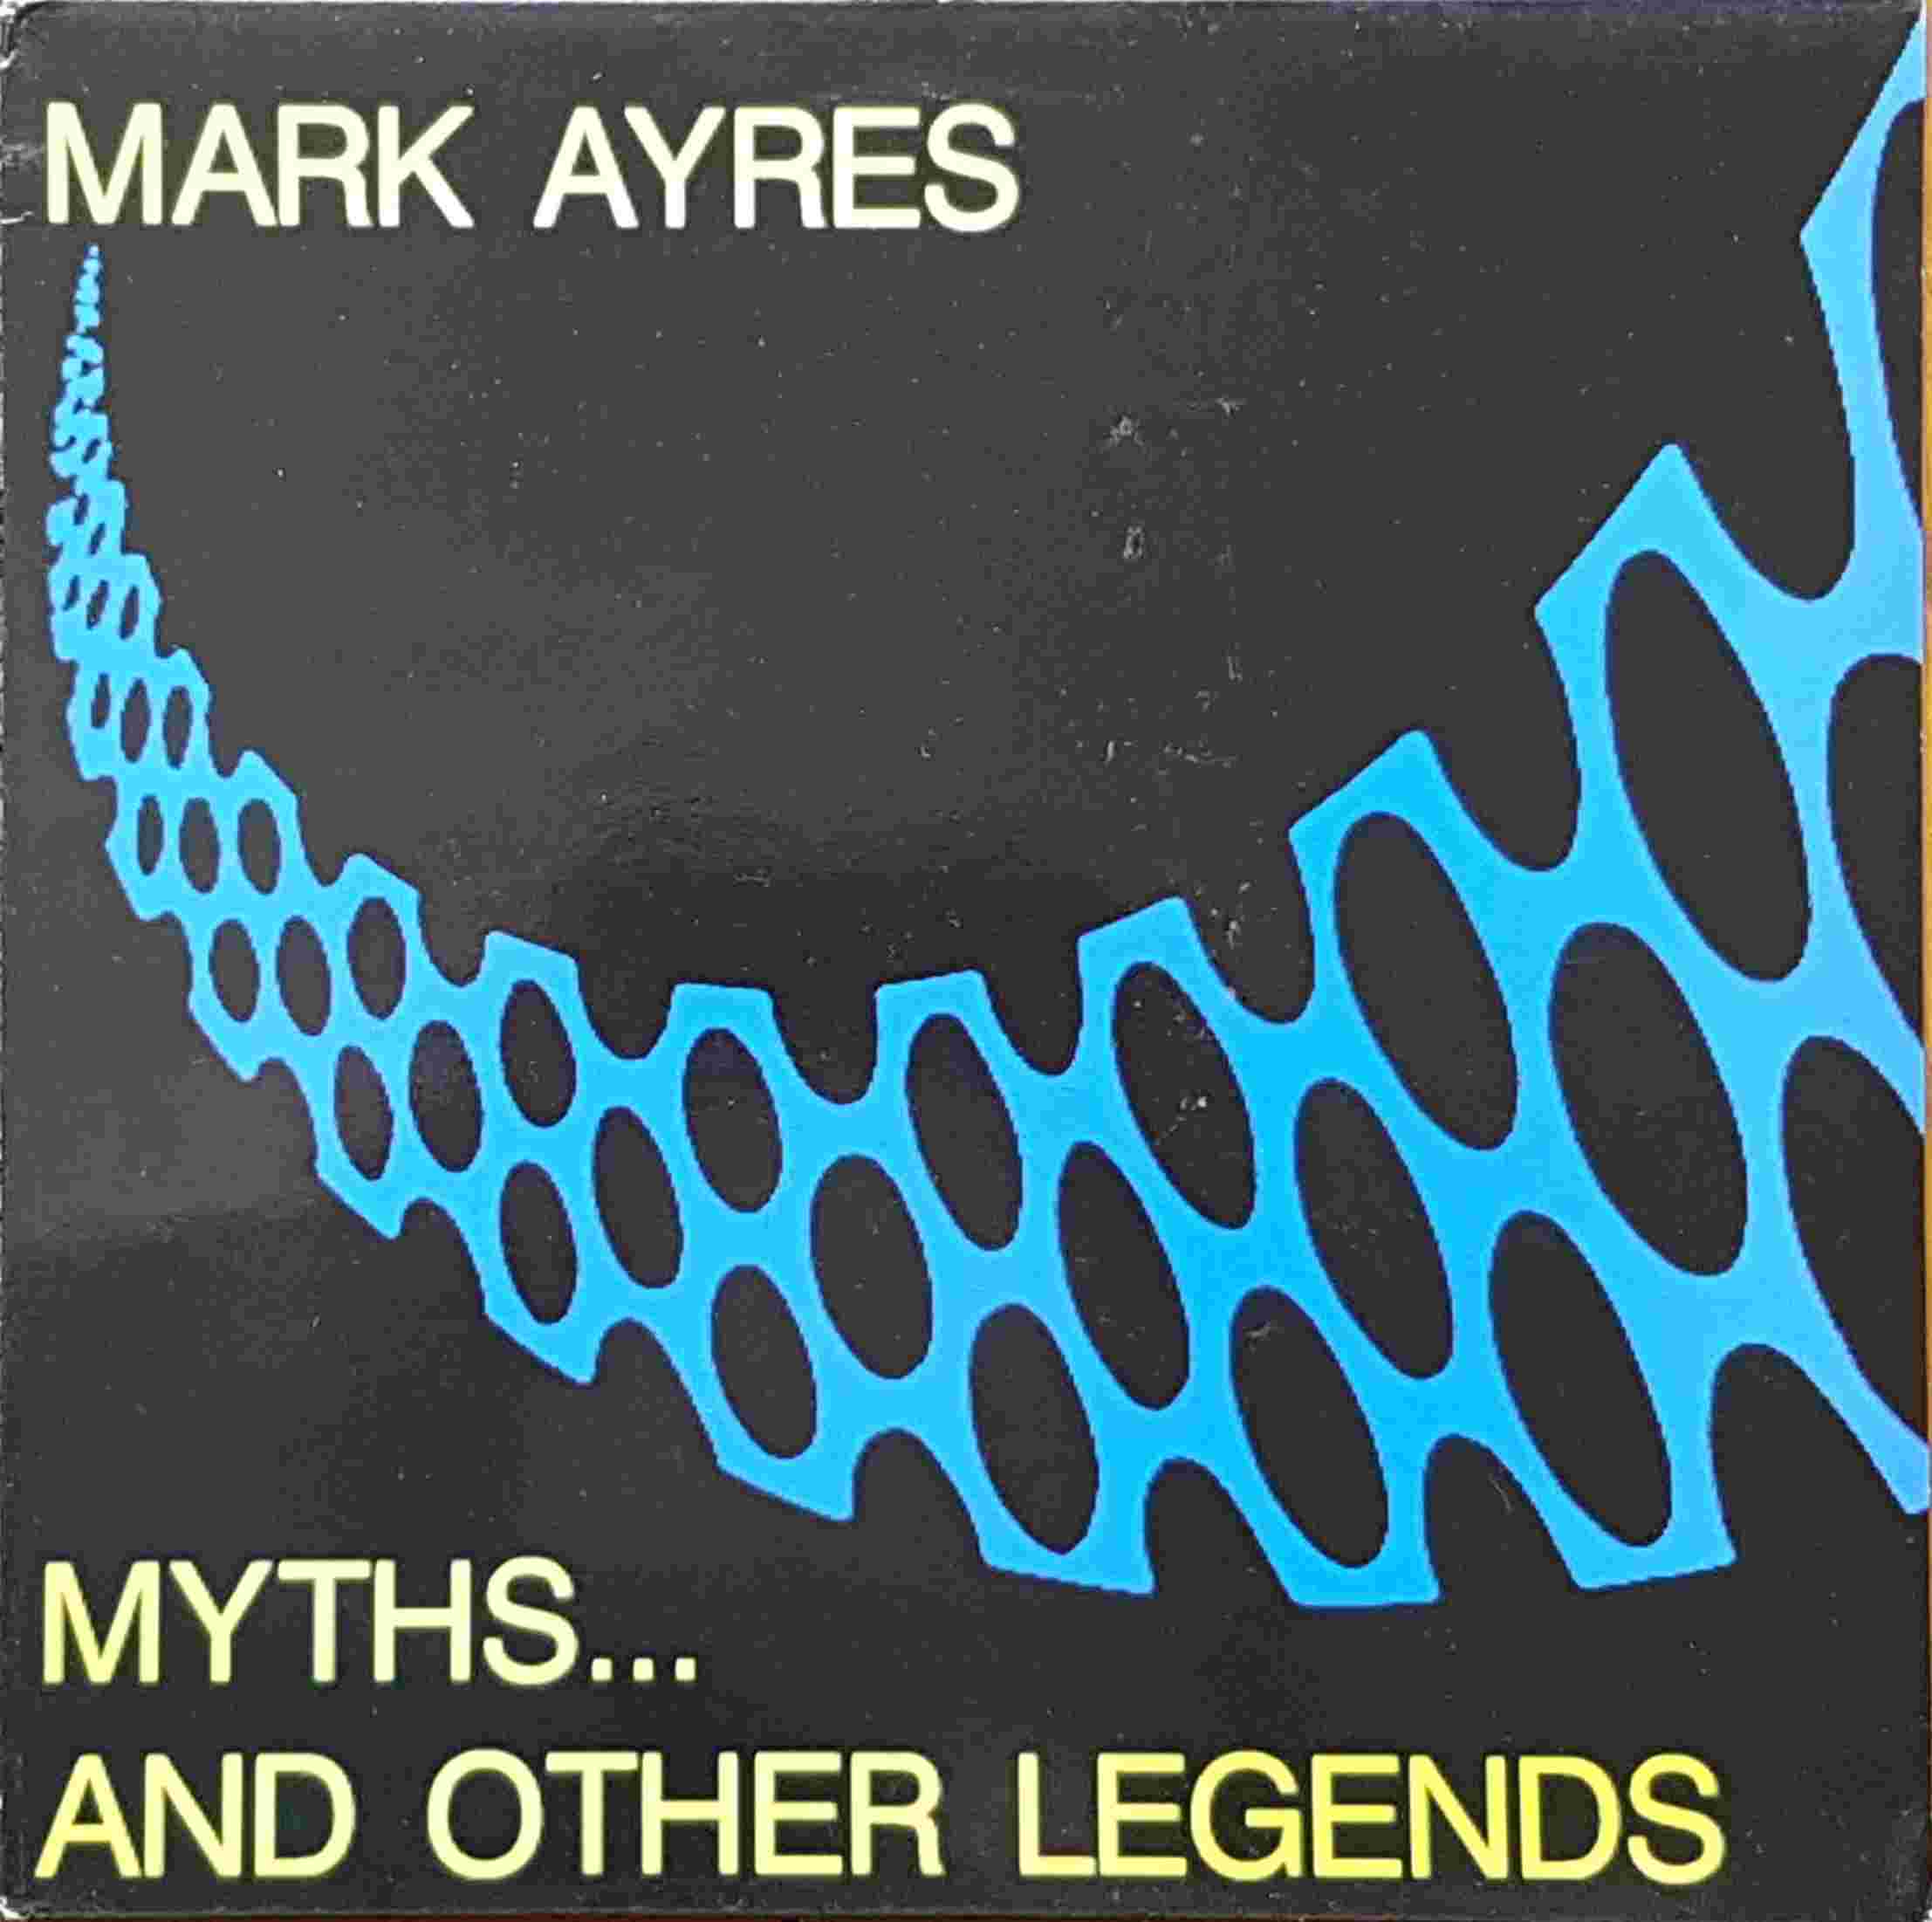 Picture of METRO 3 Myths ... And other legends by artist Mark Ayres from the BBC records and Tapes library